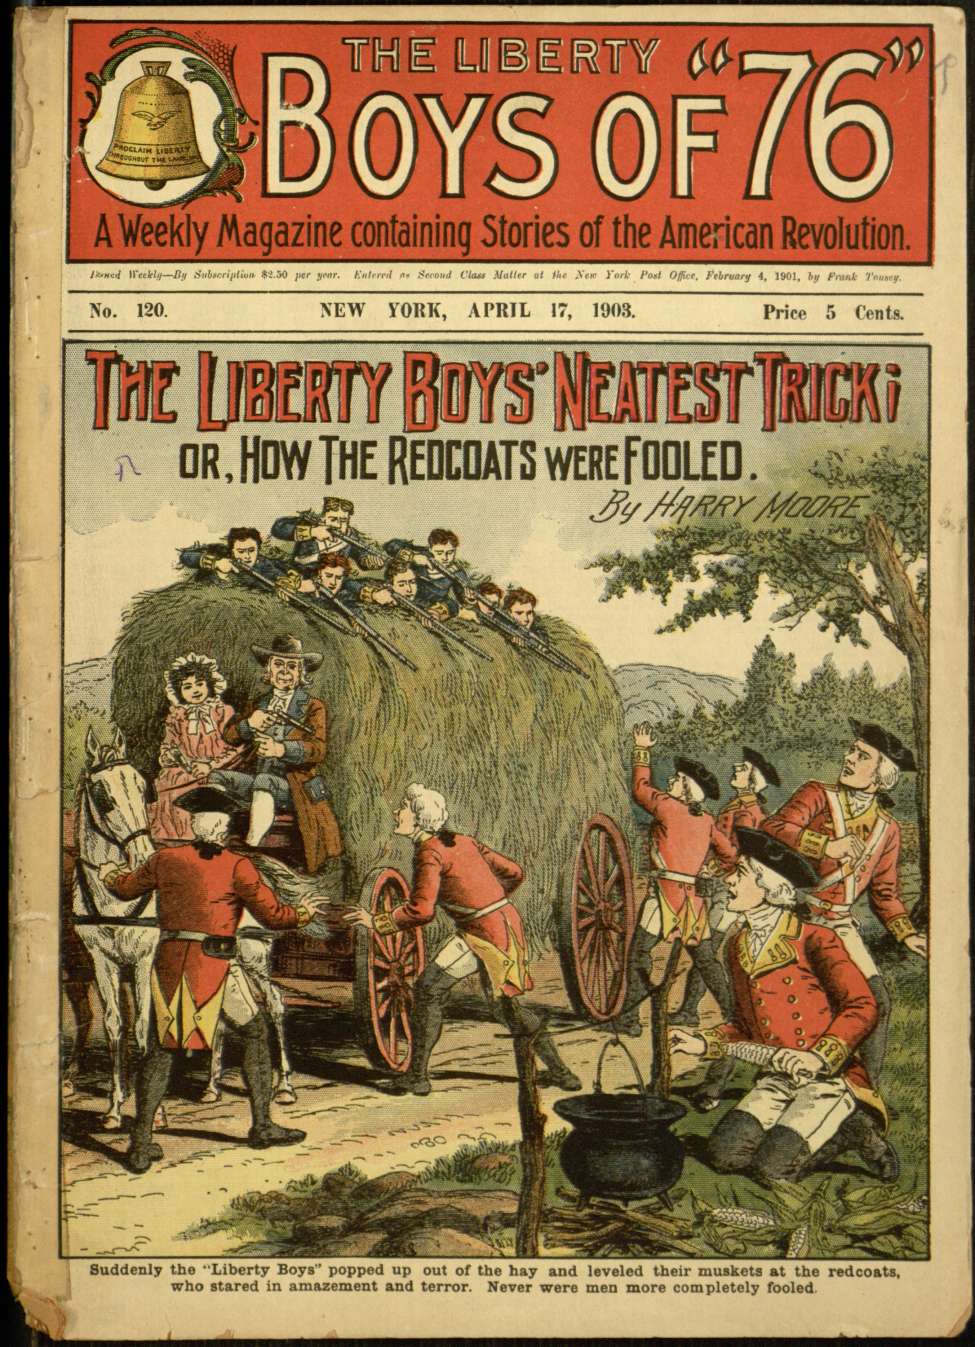 Book Cover For The Liberty Boys of 76 - 120 The Liberty Boys Neatest Trick!